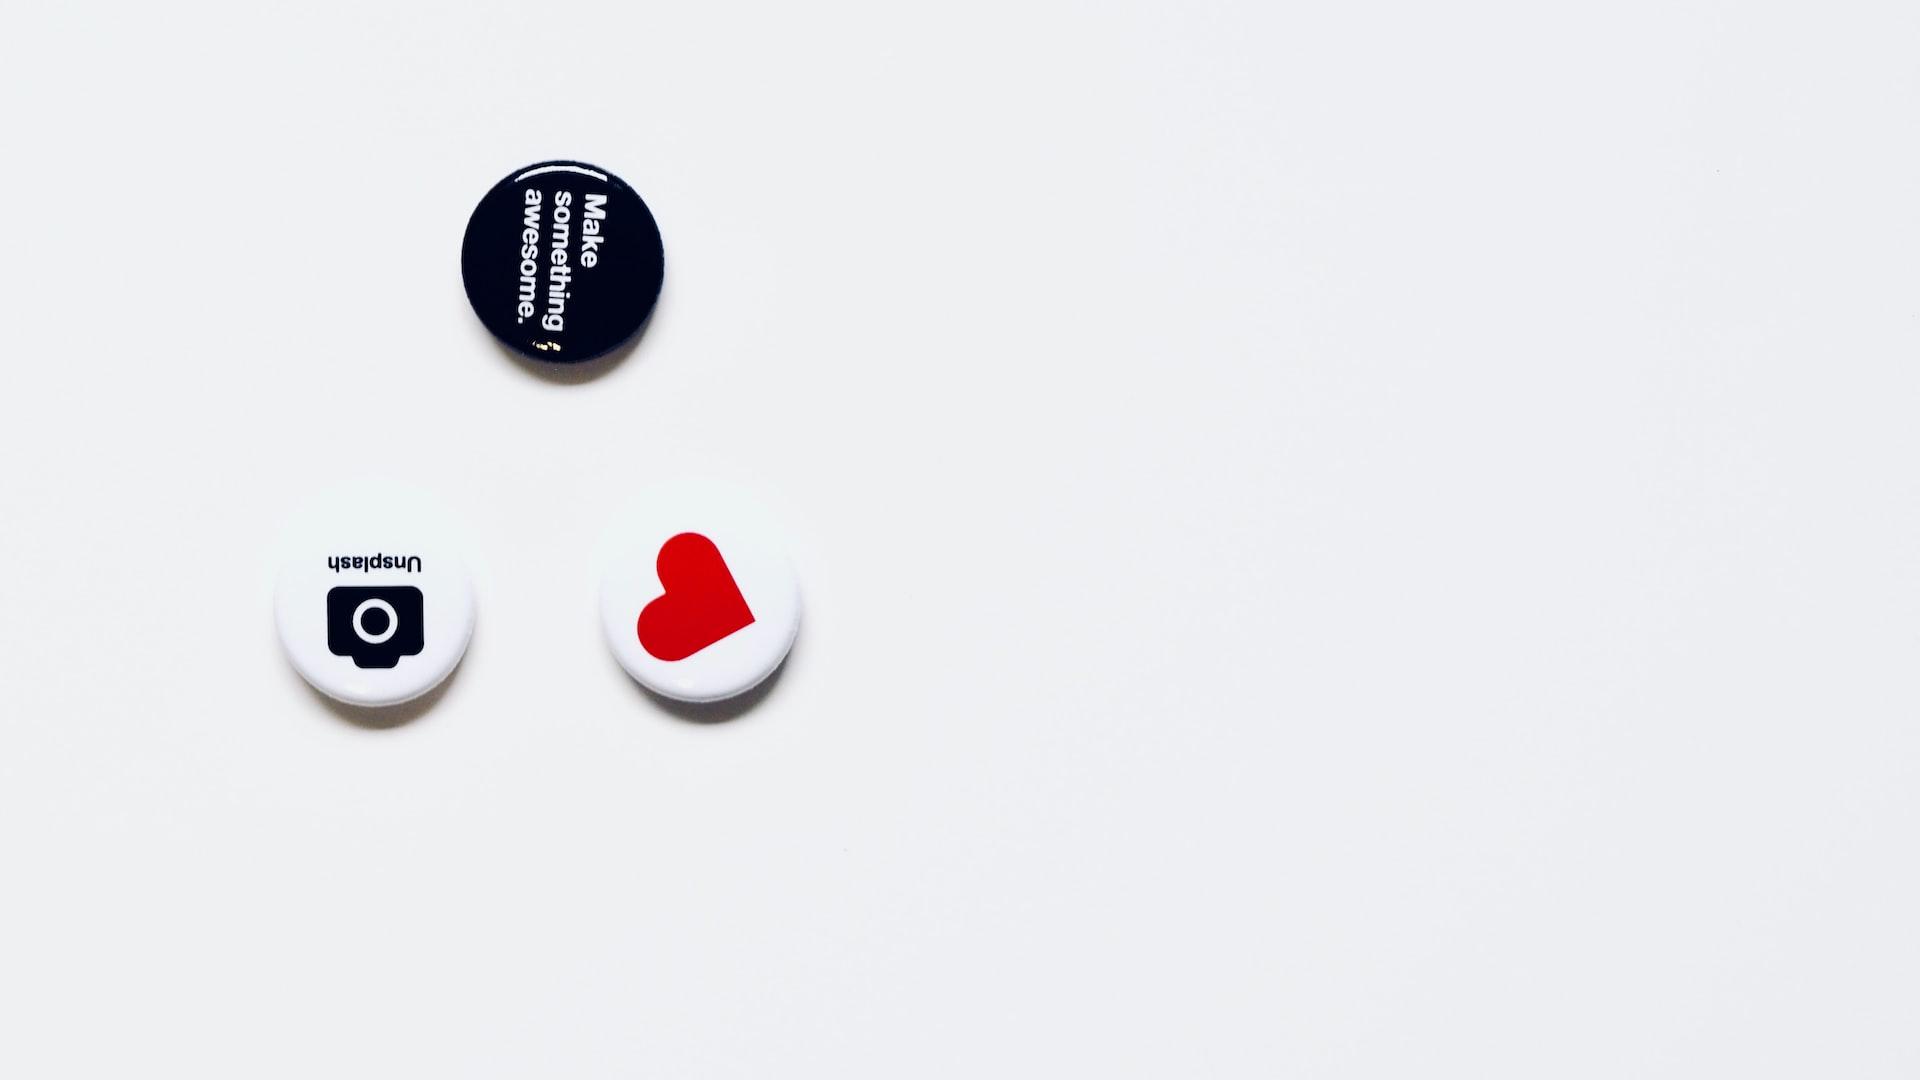 three white and black button pins on white surface